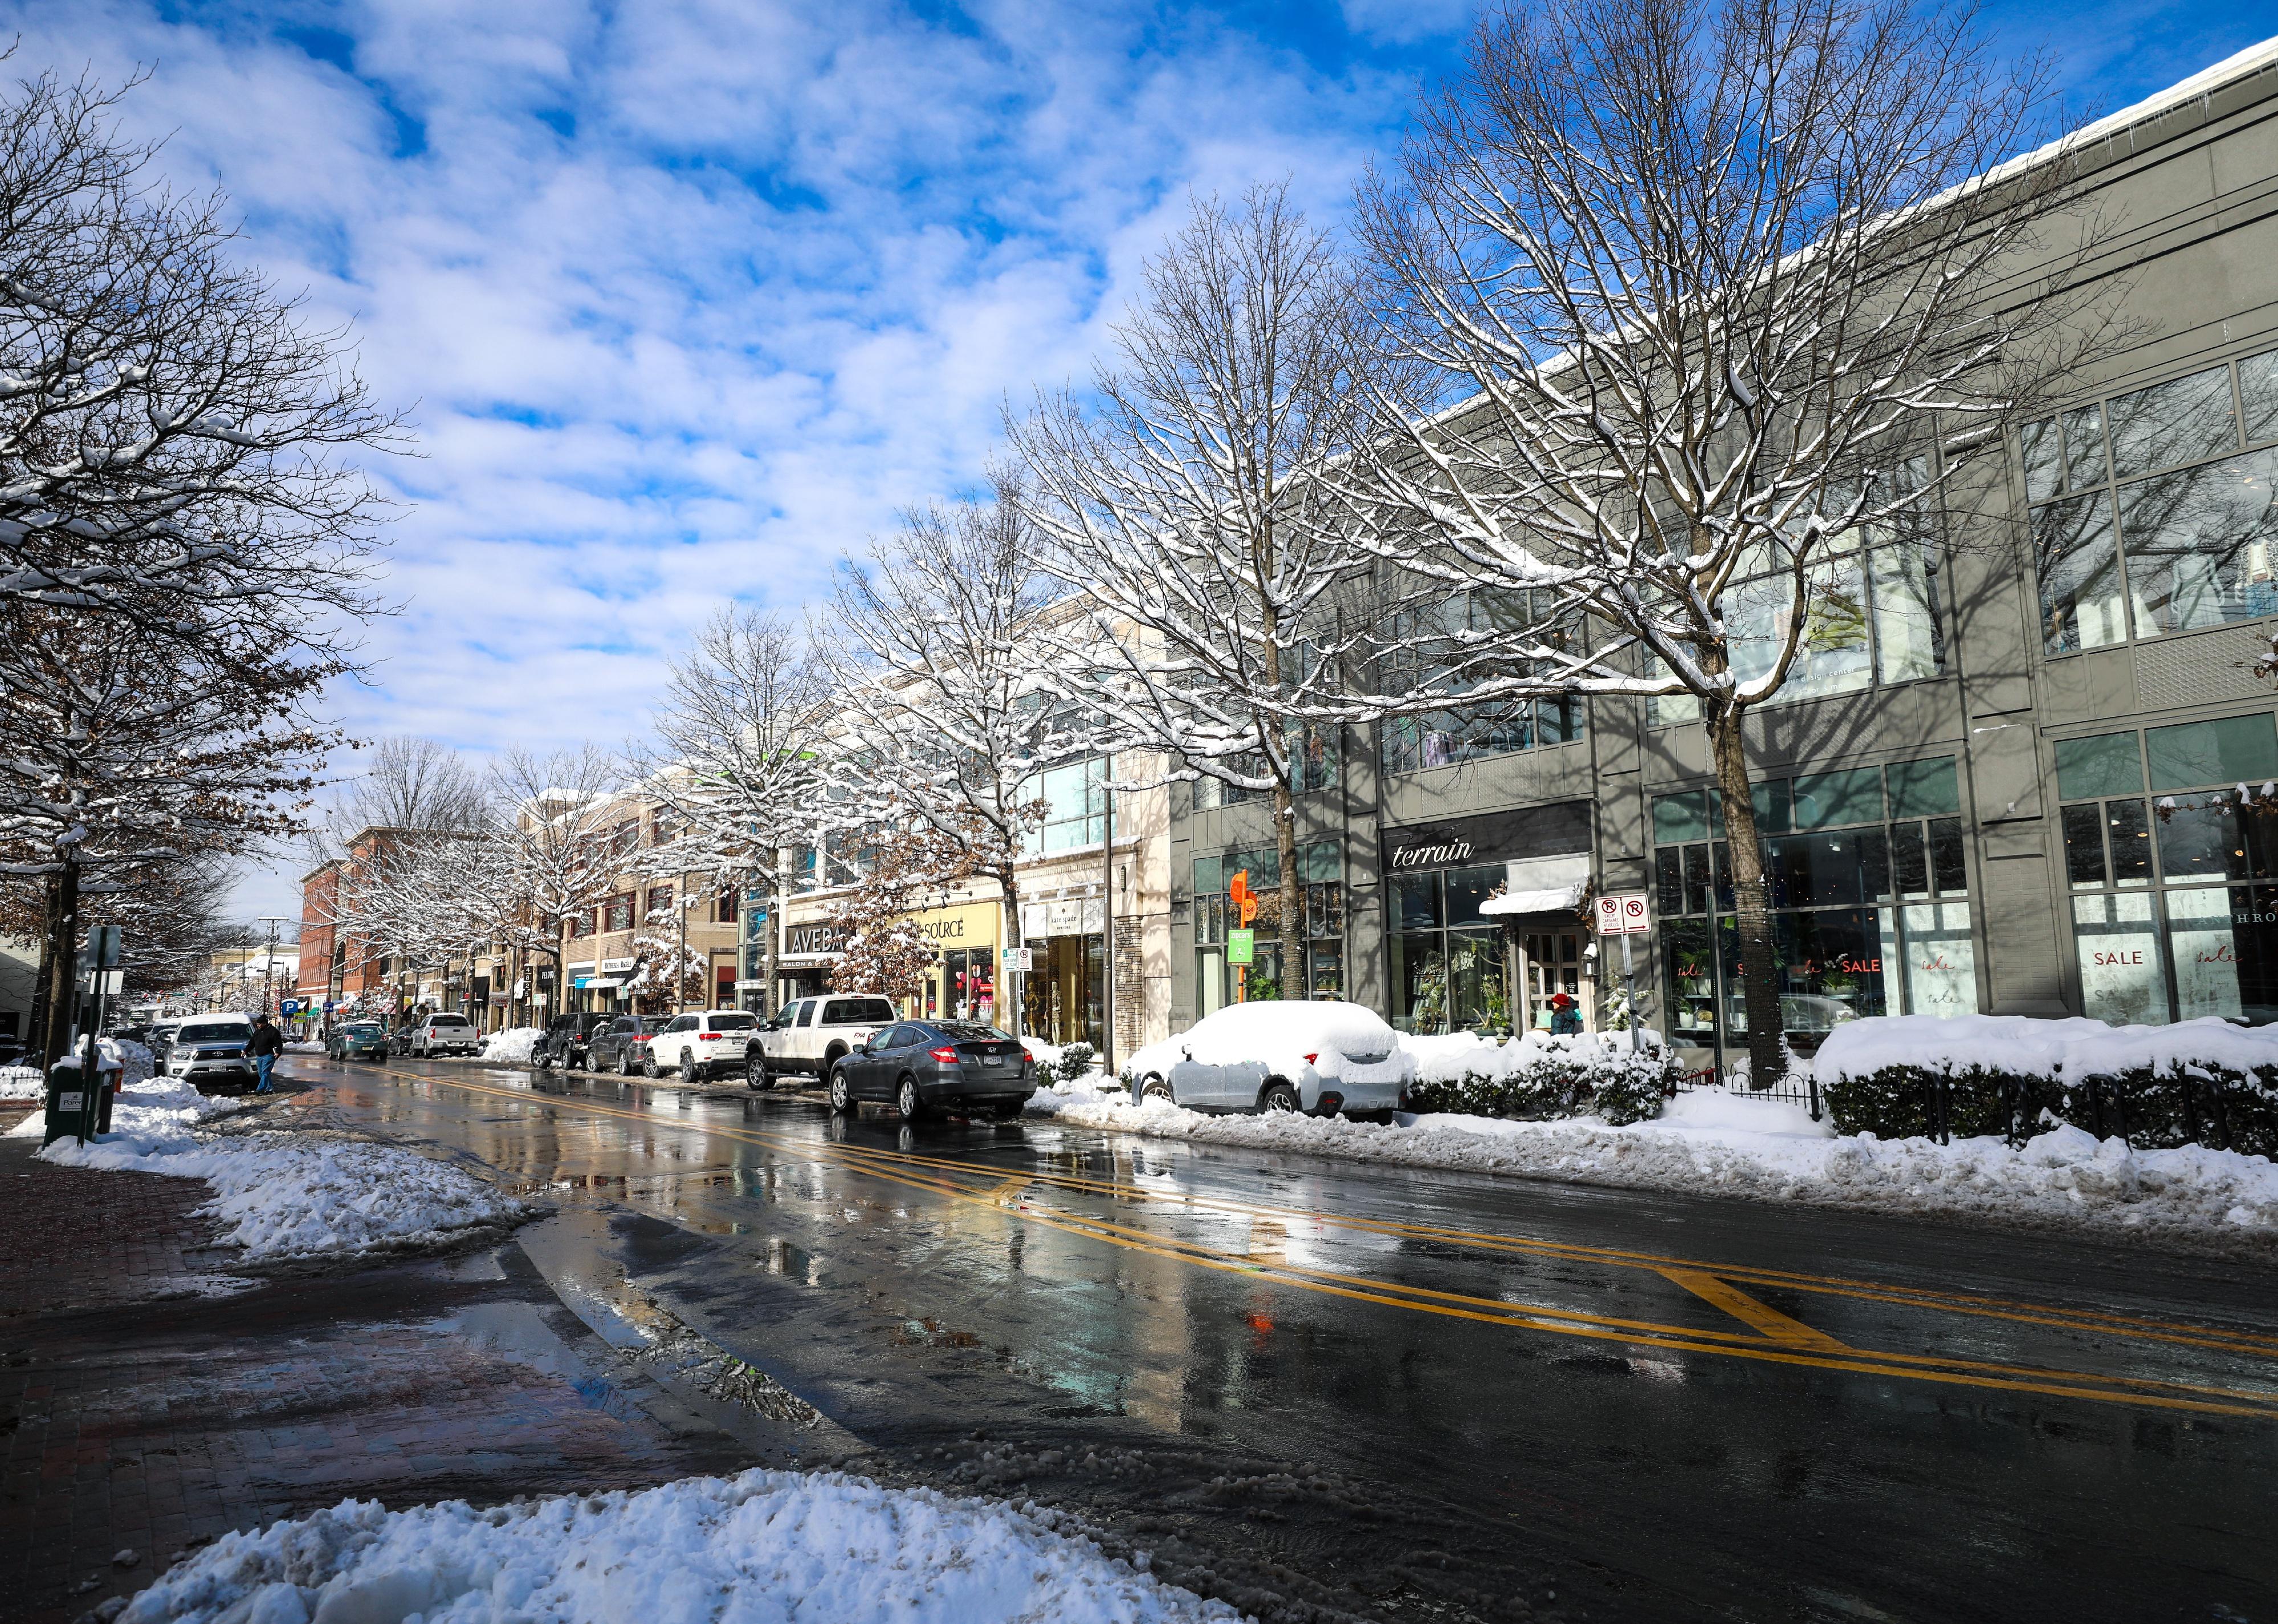 A snowy street lined with businesses.